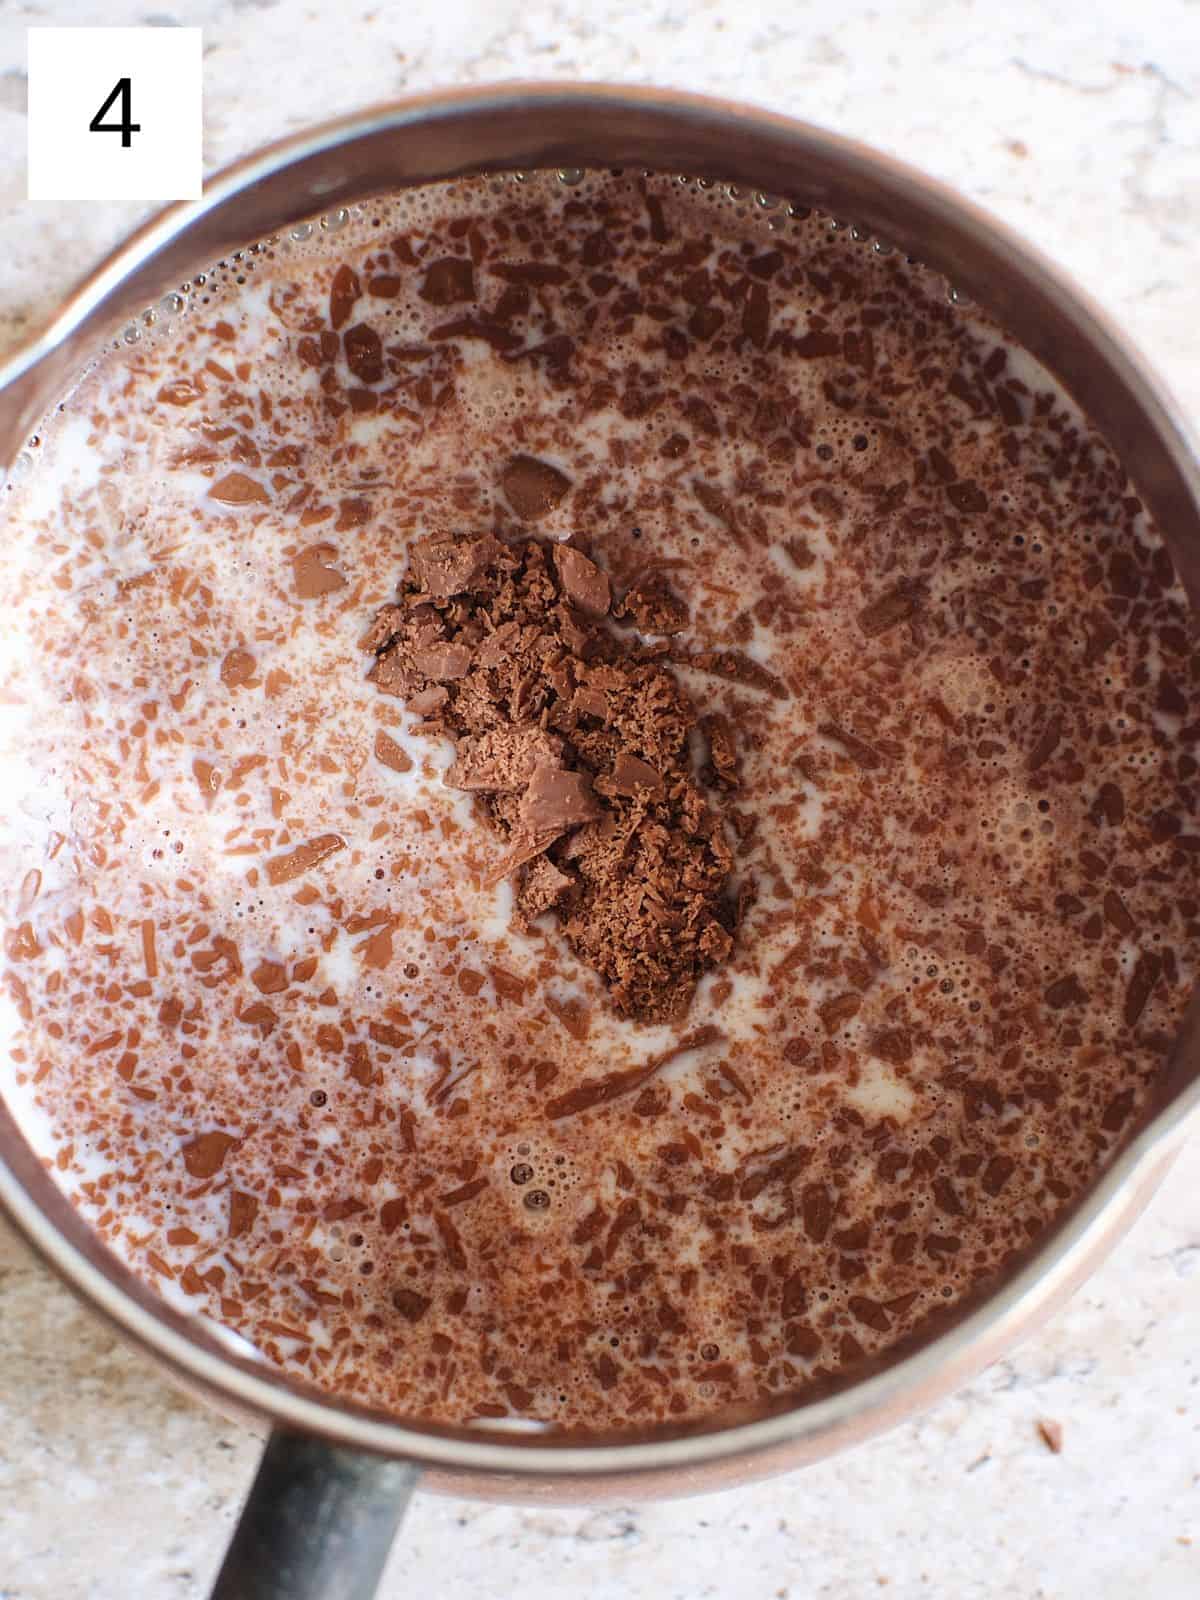 a pan filled with a mixture of chocolate and milk.